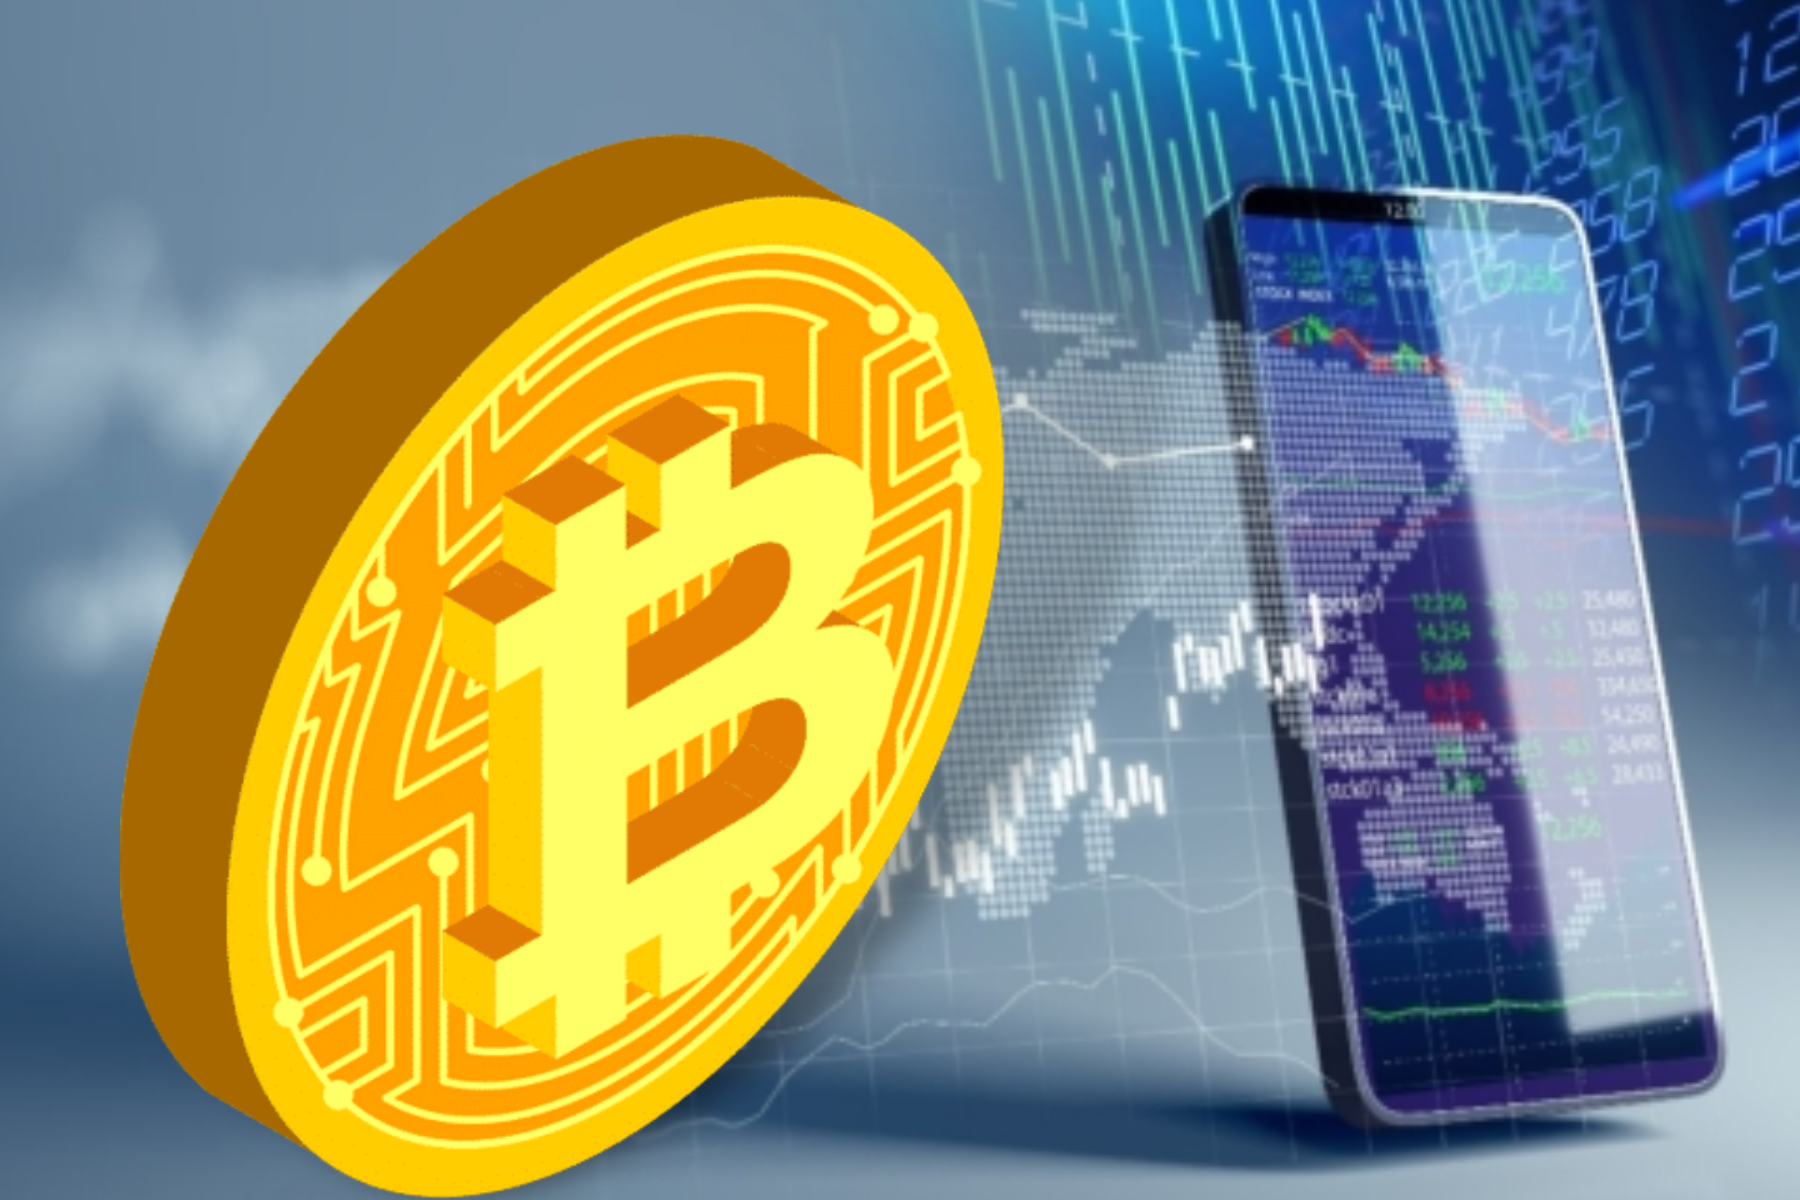 A smartphone displaying graphs alongside a Bitcoin